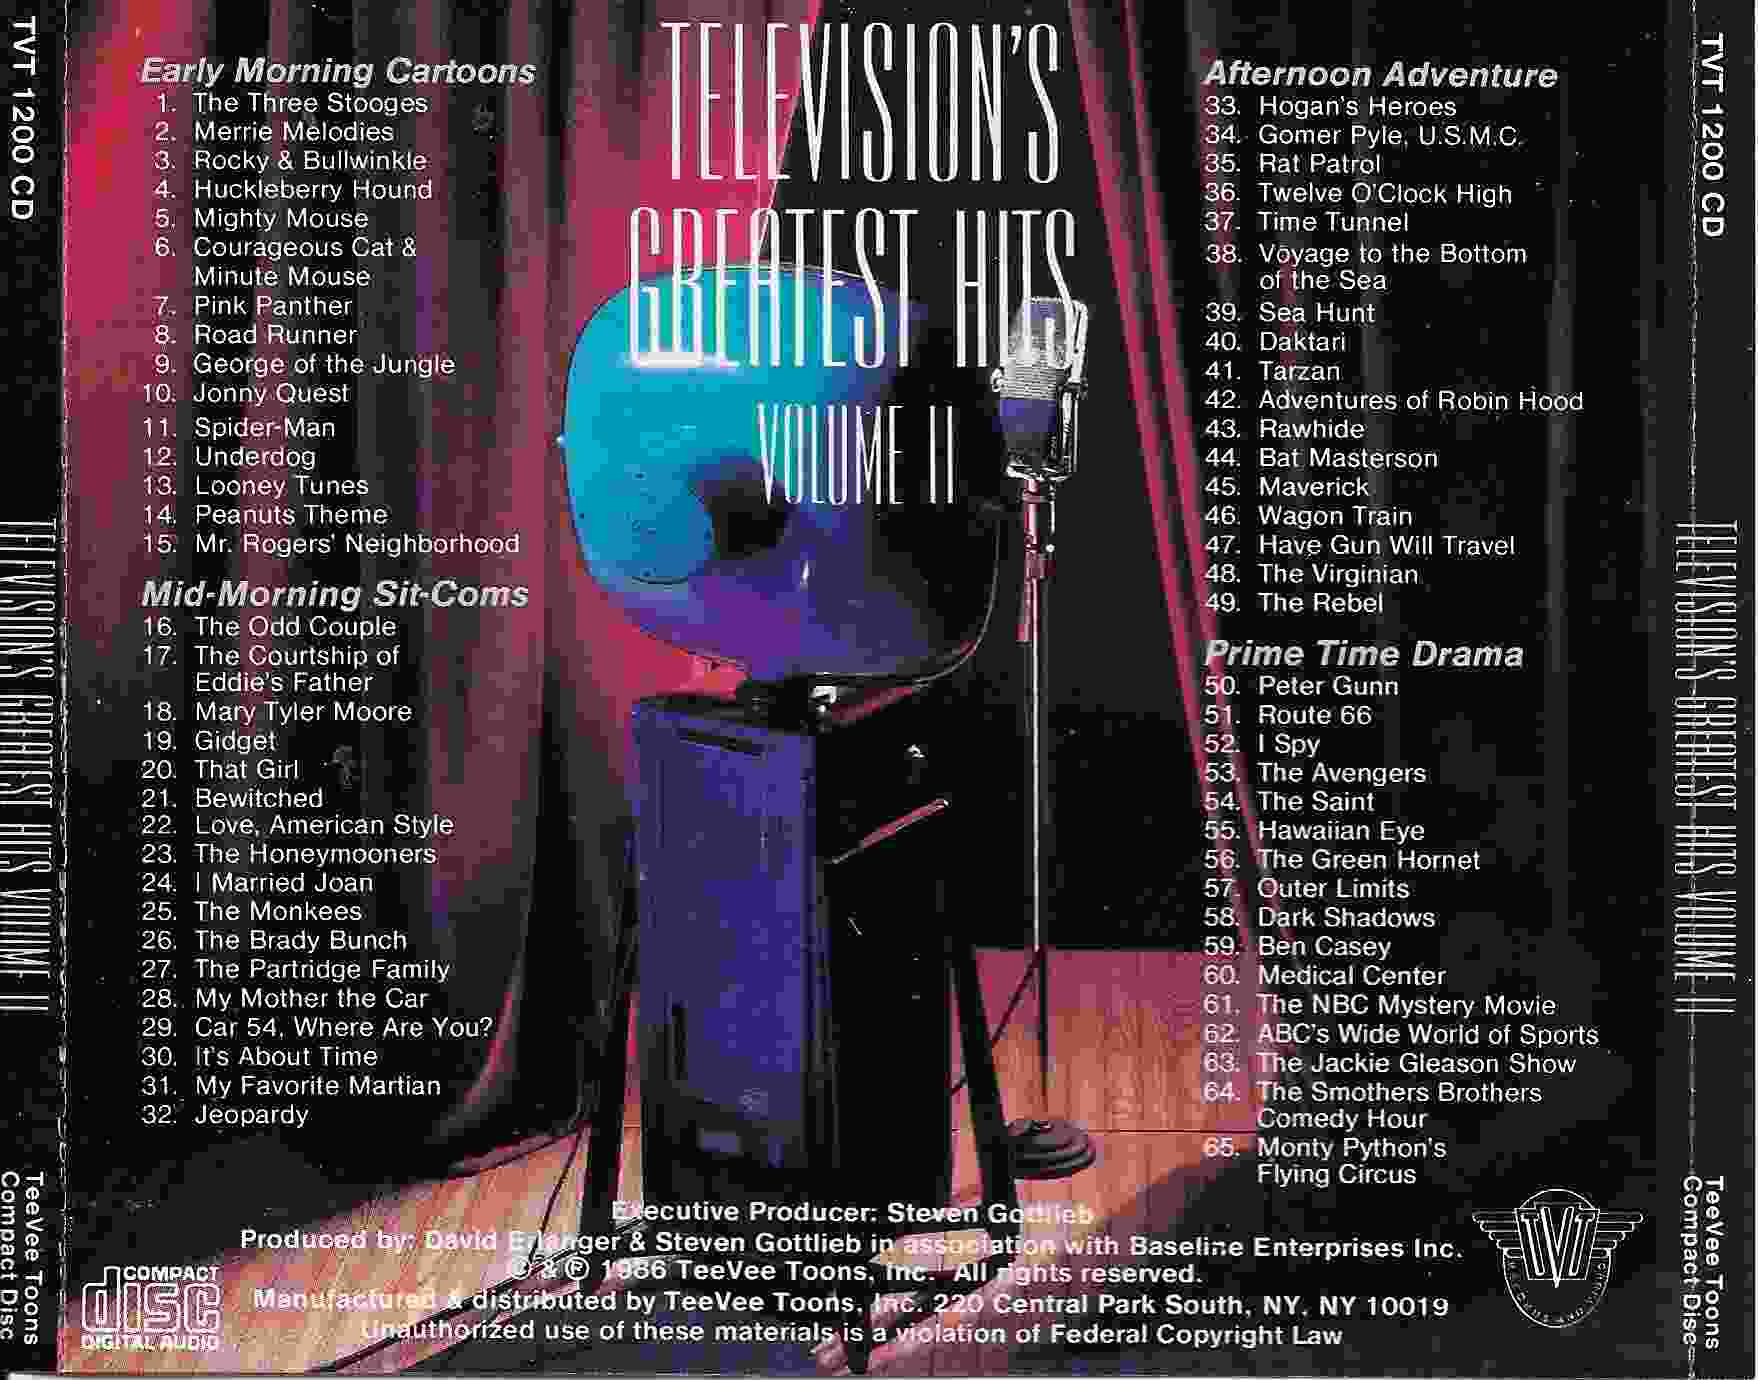 Picture of TVT 1200 CD Television's greatest hits - Volume 2 by artist Various from ITV, Channel 4 and Channel 5 library